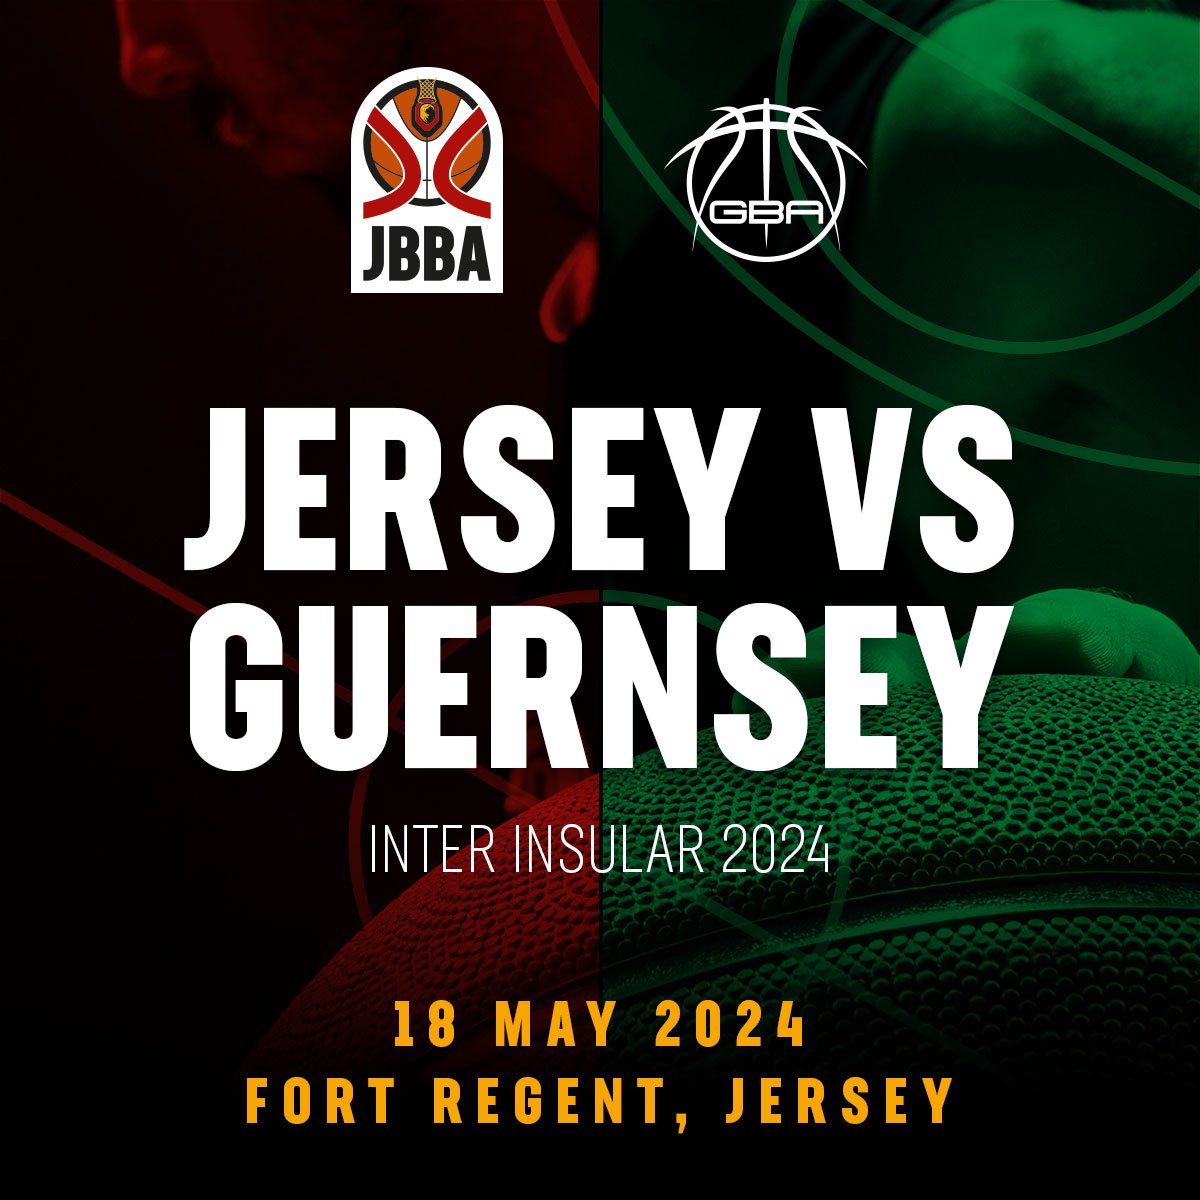 🔥 Get ready for the BIG GAME! 🔥

Join us on Saturday 18th May at Fort Regent as Jersey hosts the much-anticipated Jersey vs. Guernsey Inter-Insular competition after six long years! It's time to show your support for your Jersey teams in full force